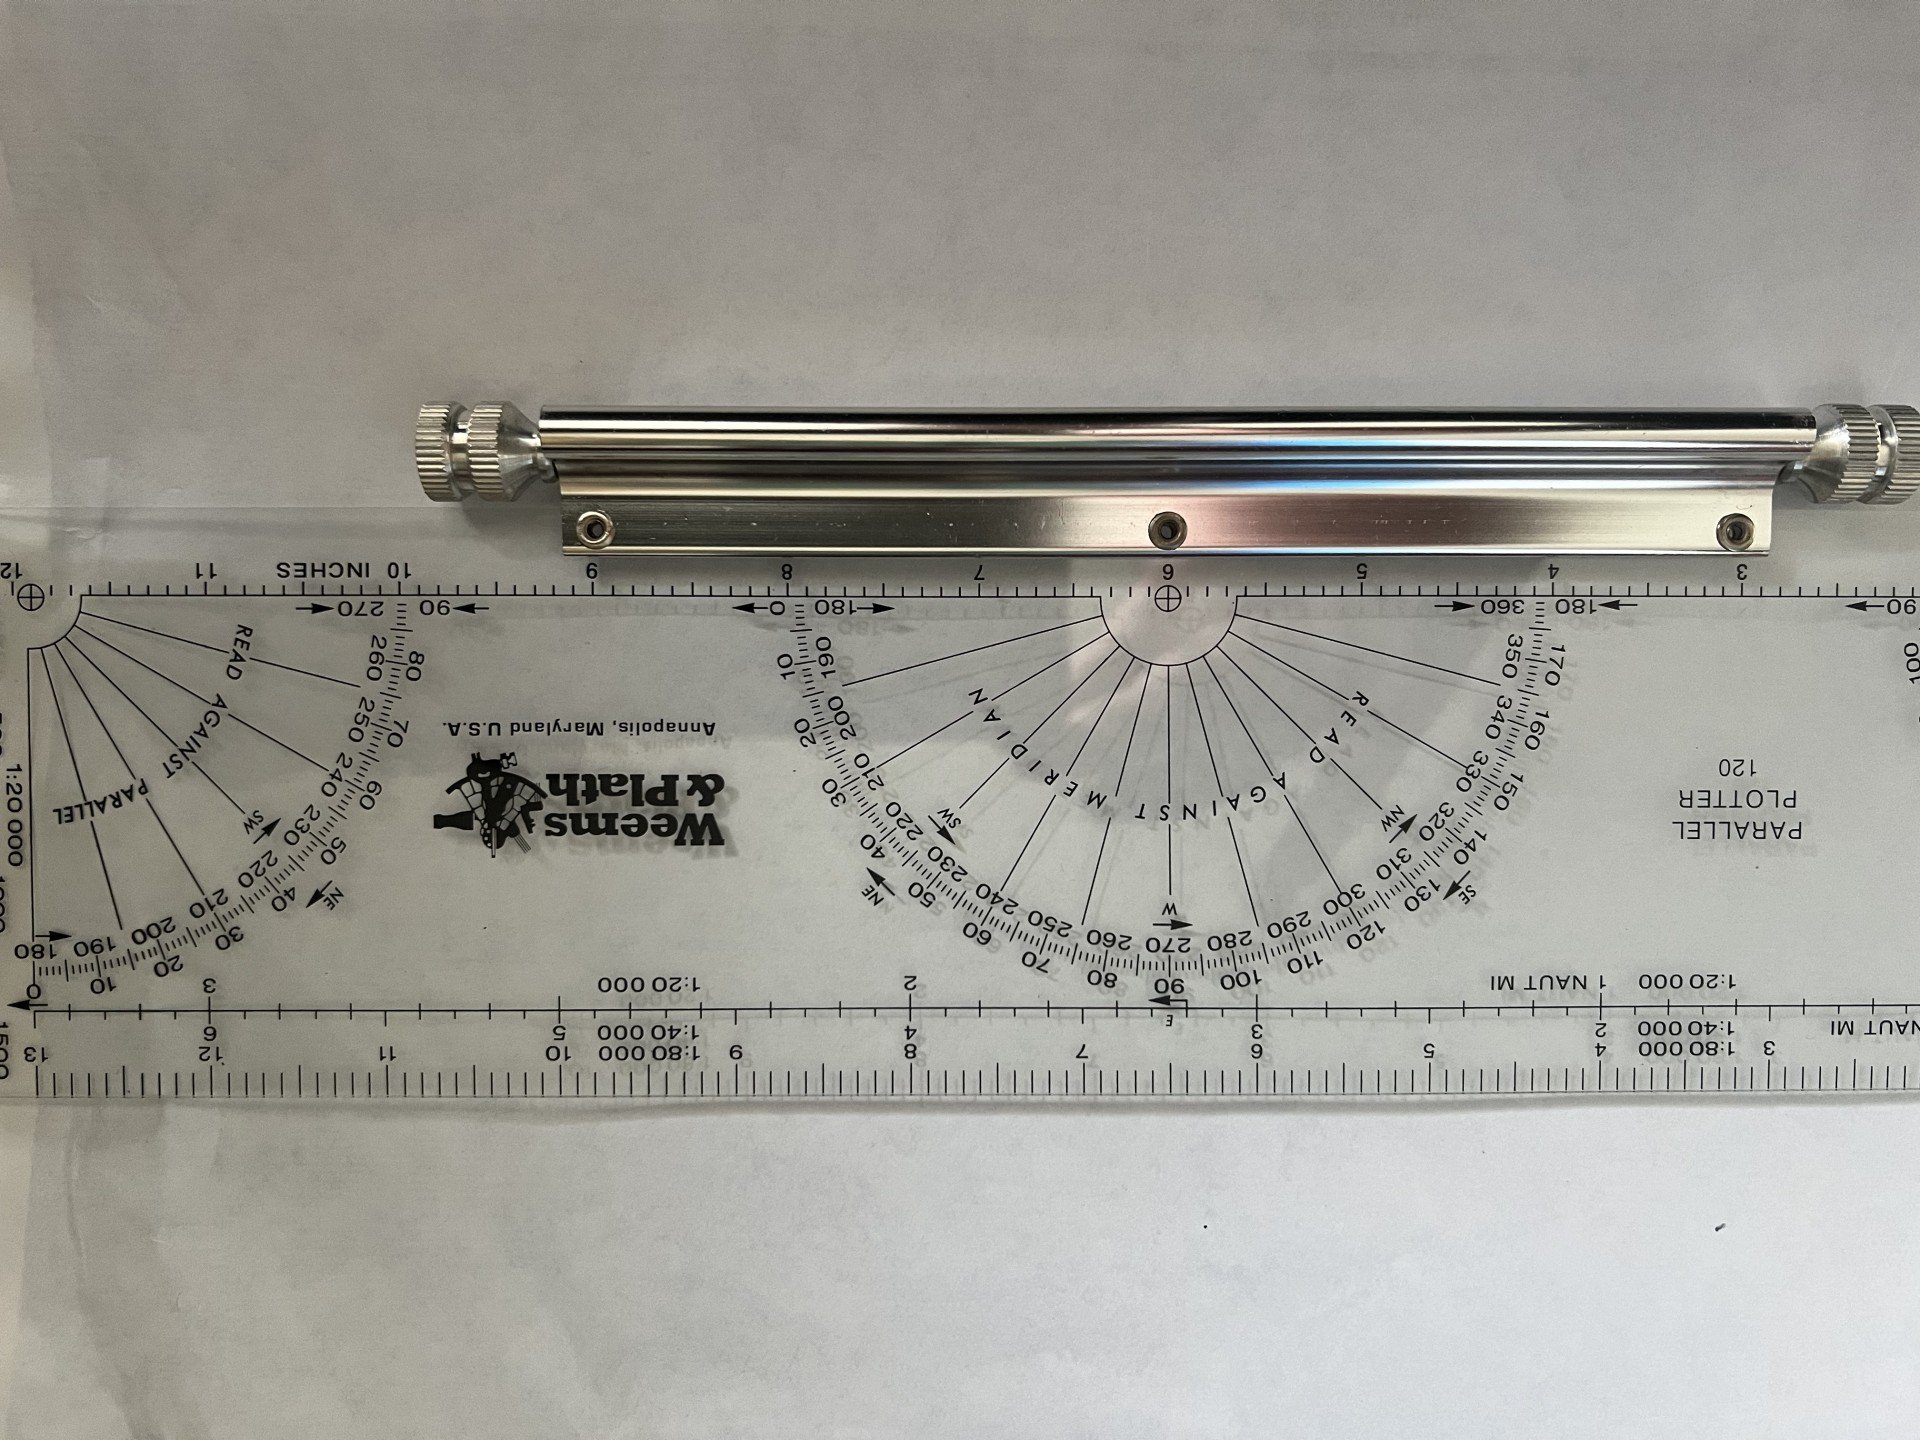 Parallel rule with protractors and roller for smooth operation over your chart.